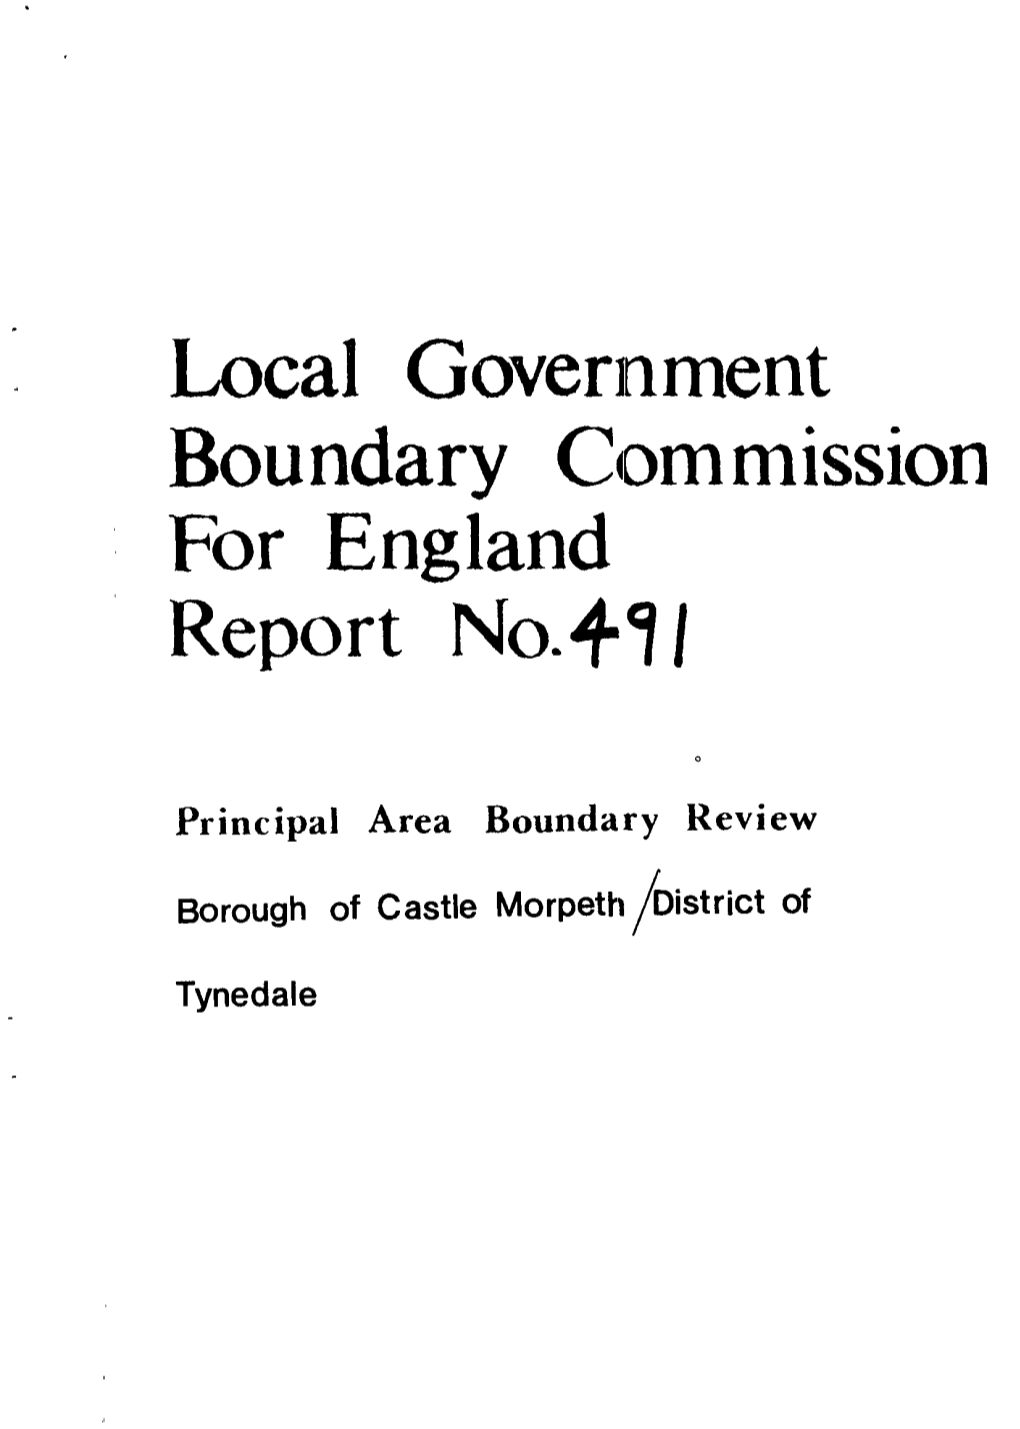 Local Government Boundary Commission for England Report No.4*?